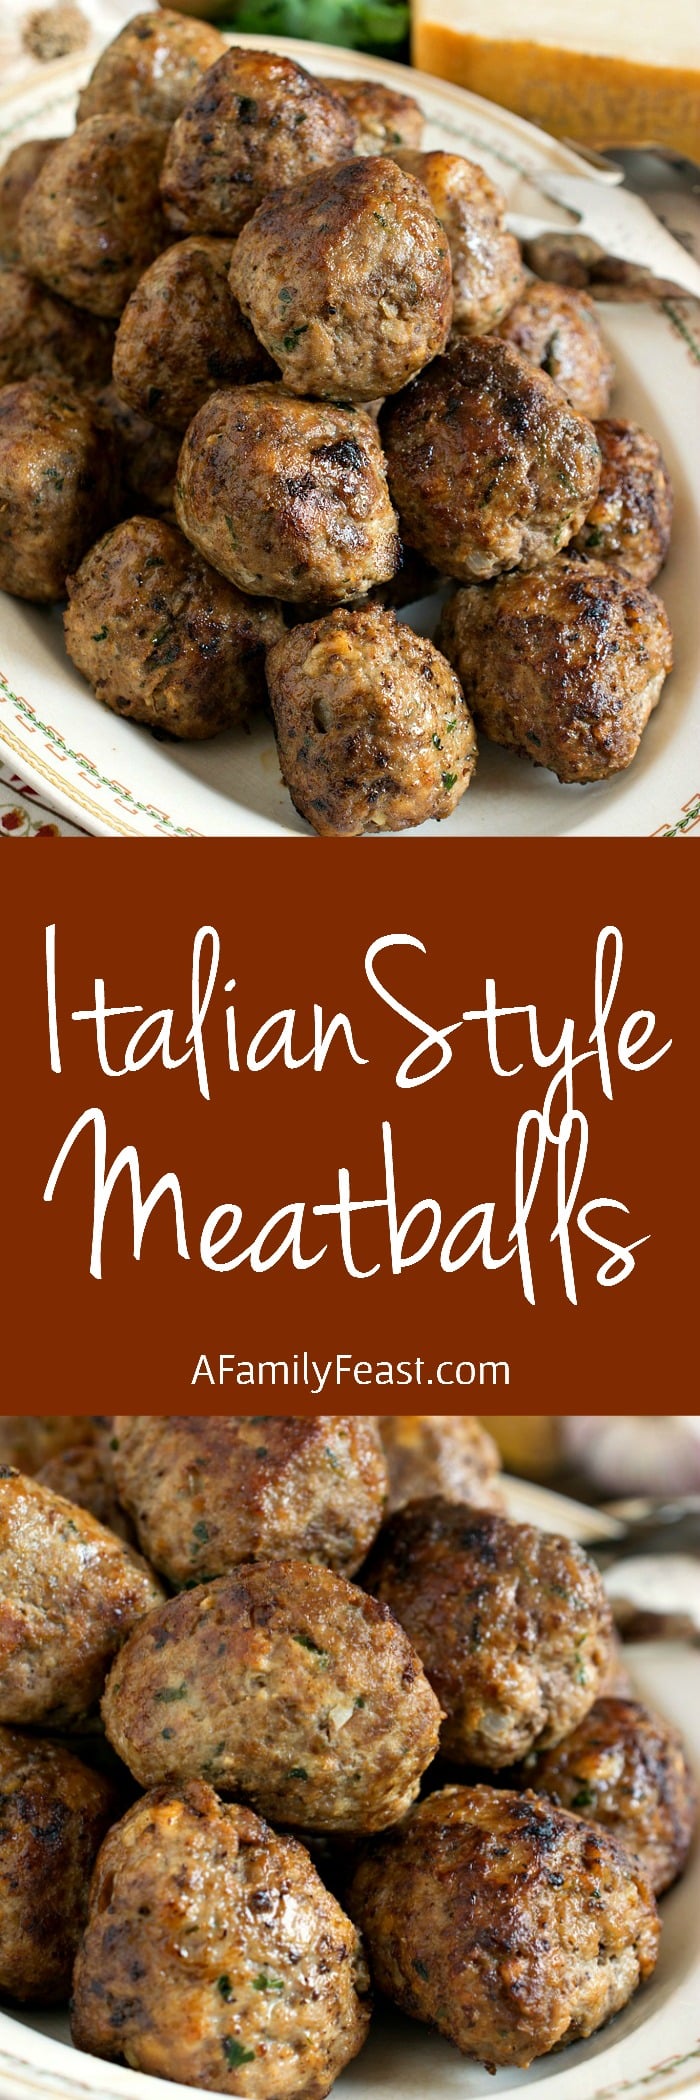 A classic recipe for Italian-Style Meatballs - moist and delicious on their own or served with your favorite Italian sauce. A recipe everyone should have in their collection!